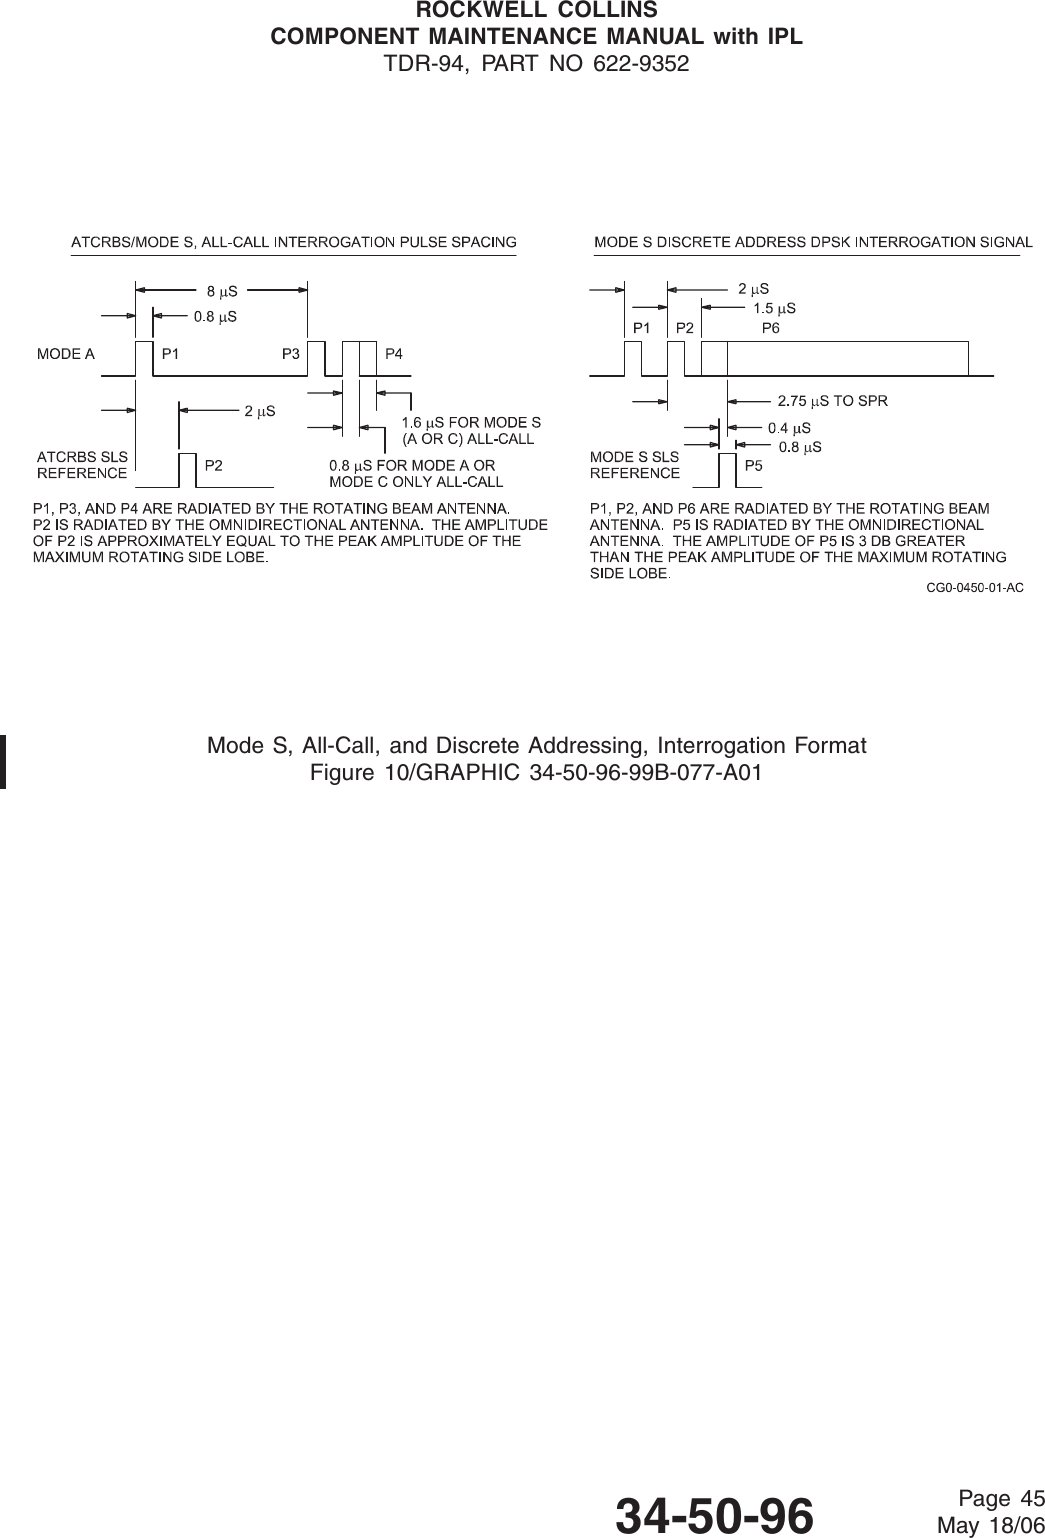 ROCKWELL COLLINSCOMPONENT MAINTENANCE MANUAL with IPLTDR-94, PART NO 622-9352Mode S, All-Call, and Discrete Addressing, Interrogation FormatFigure 10/GRAPHIC 34-50-96-99B-077-A0134-50-96 Page 45May 18/06